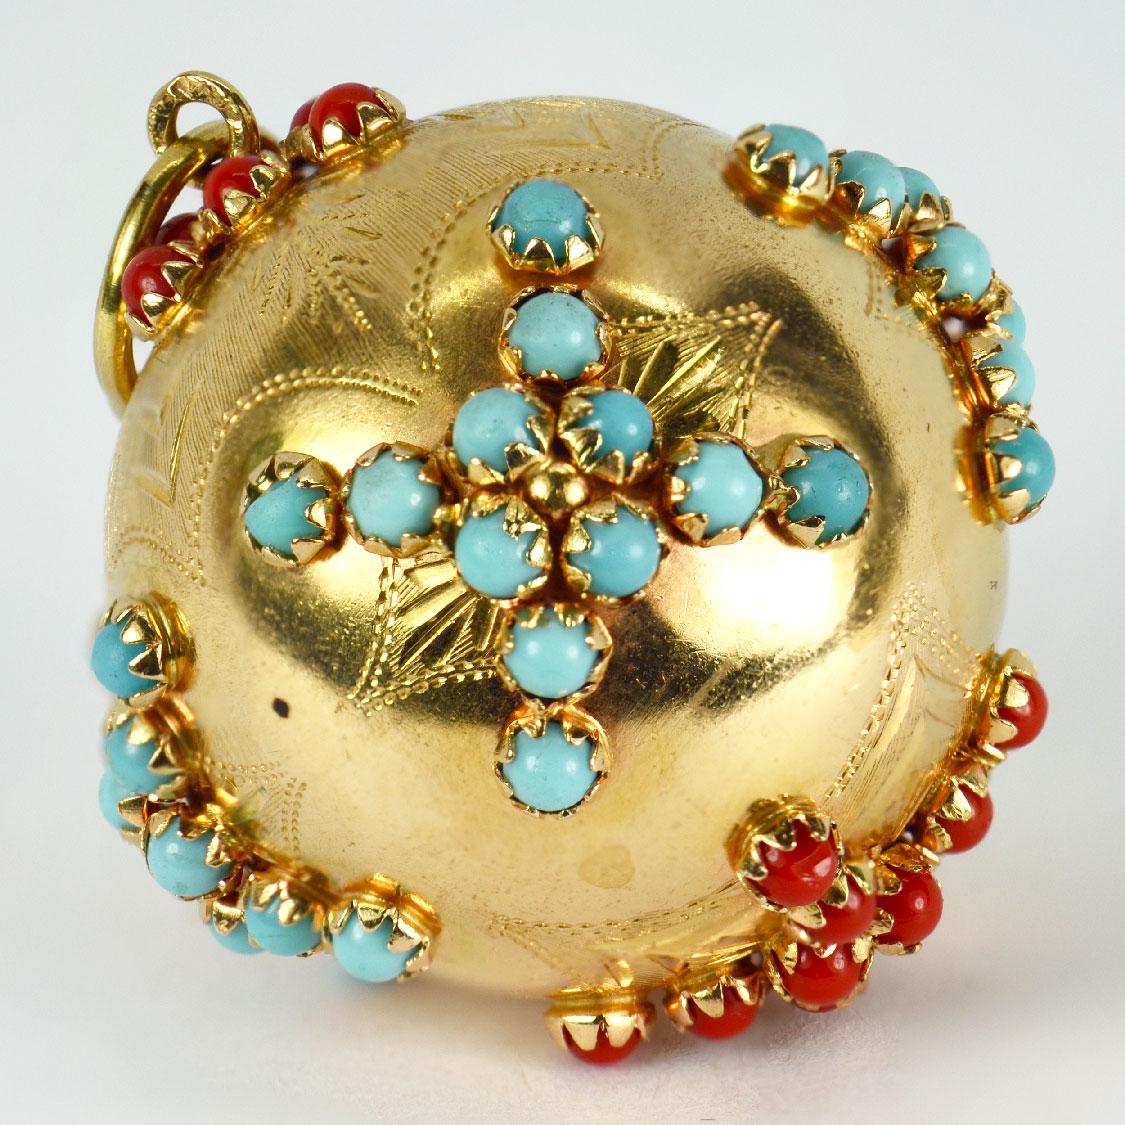 A large 18 karat (18K) yellow gold charm pendant designed as a sphere set with coral and turquoise cabochons. Stamped 750 to the bail for 18 karat gold. One coral bead missing.

Dimensions: 4 x 3.5 x 3.5 cm (not including jump ring)
Weight: 20.81